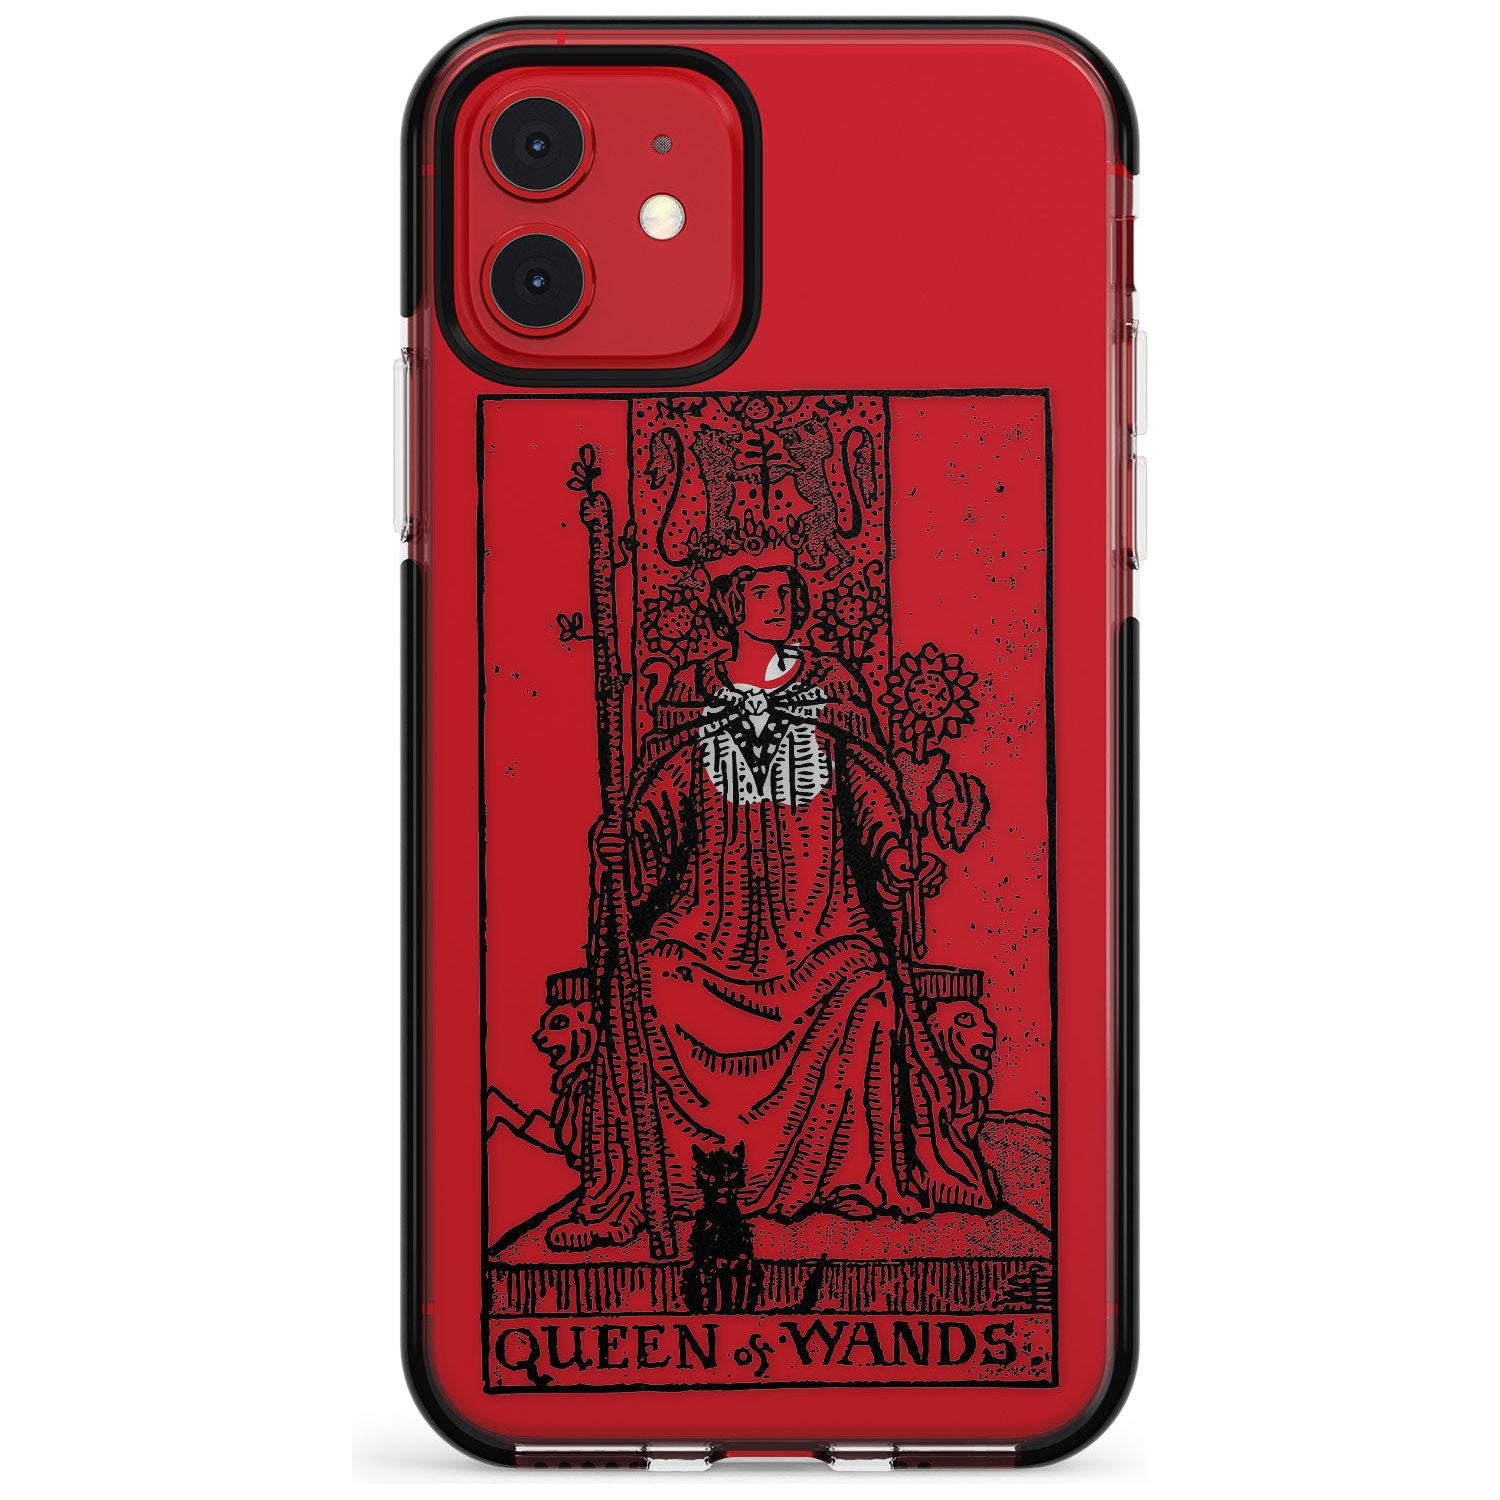 Queen of Wands Tarot Card - Transparent Pink Fade Impact Phone Case for iPhone 11 Pro Max